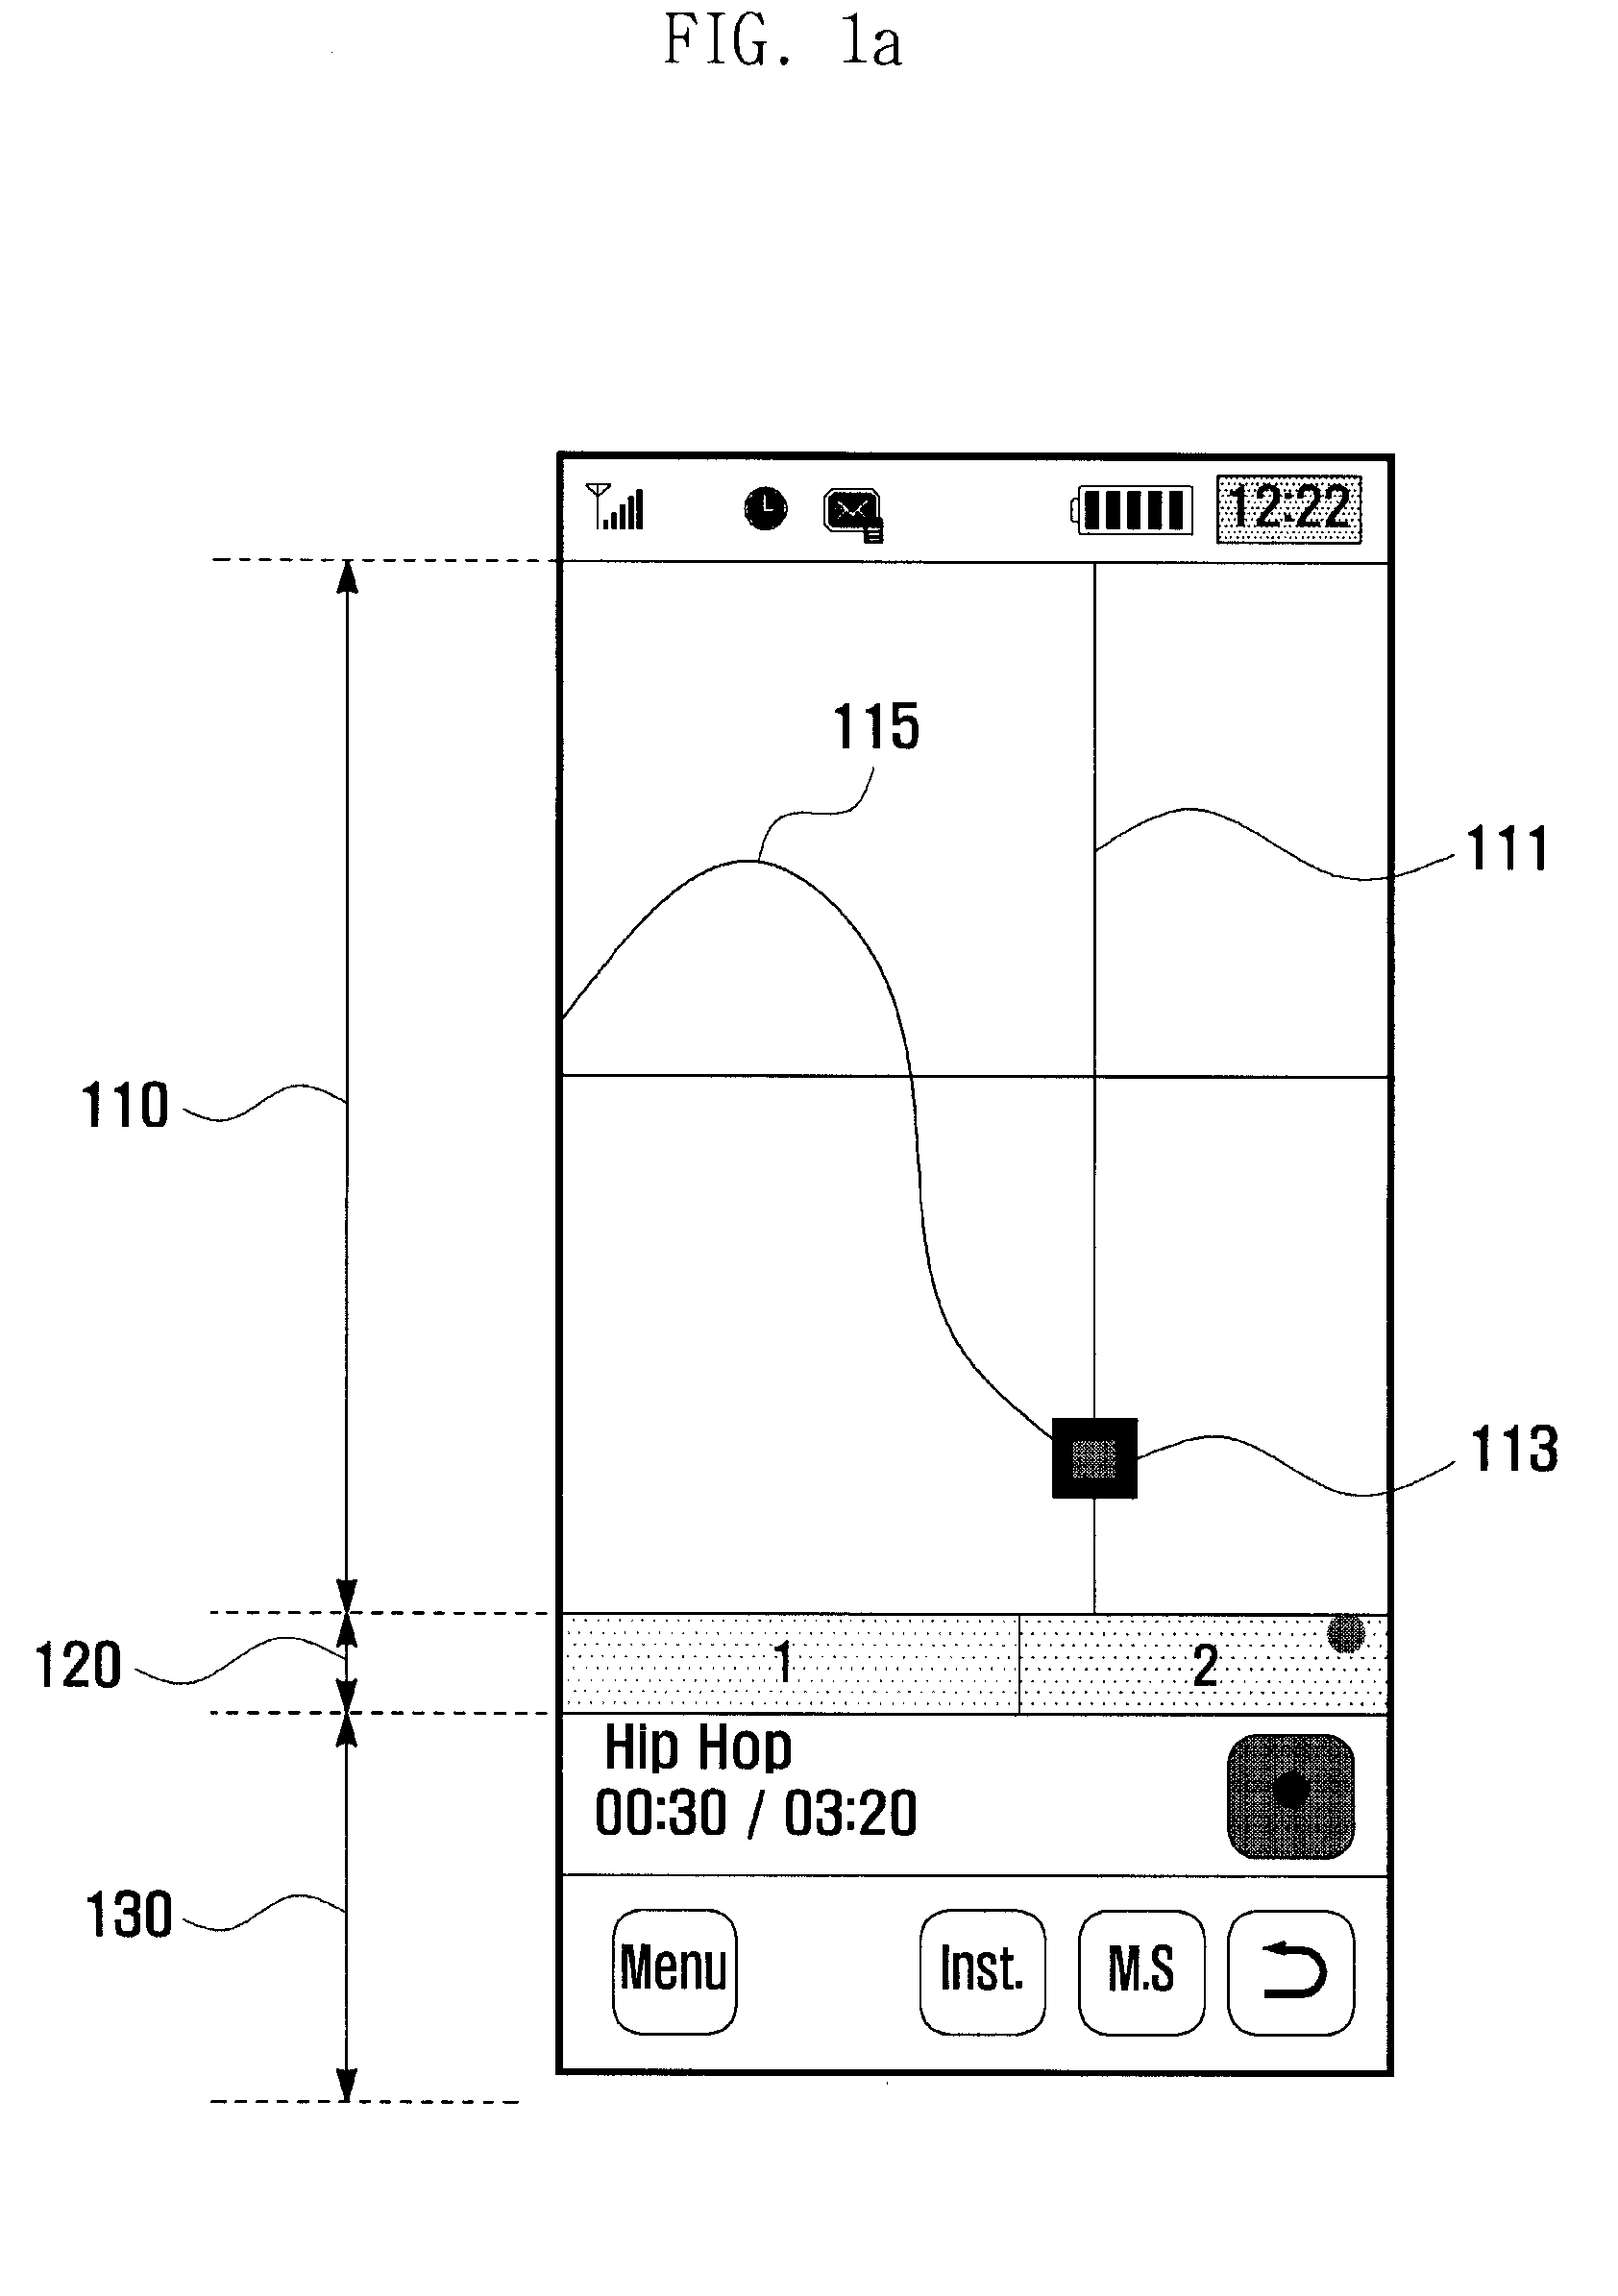 Music composition method and system for portable device having touchscreen